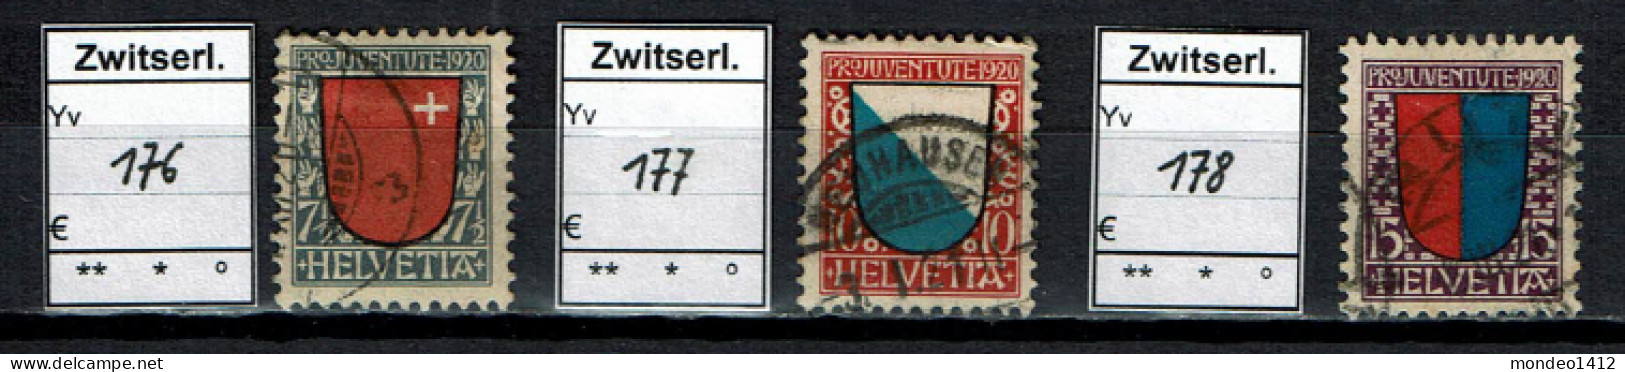 Suisse 1920 - YT 176/178 - Oblit. Used - Gebraucht